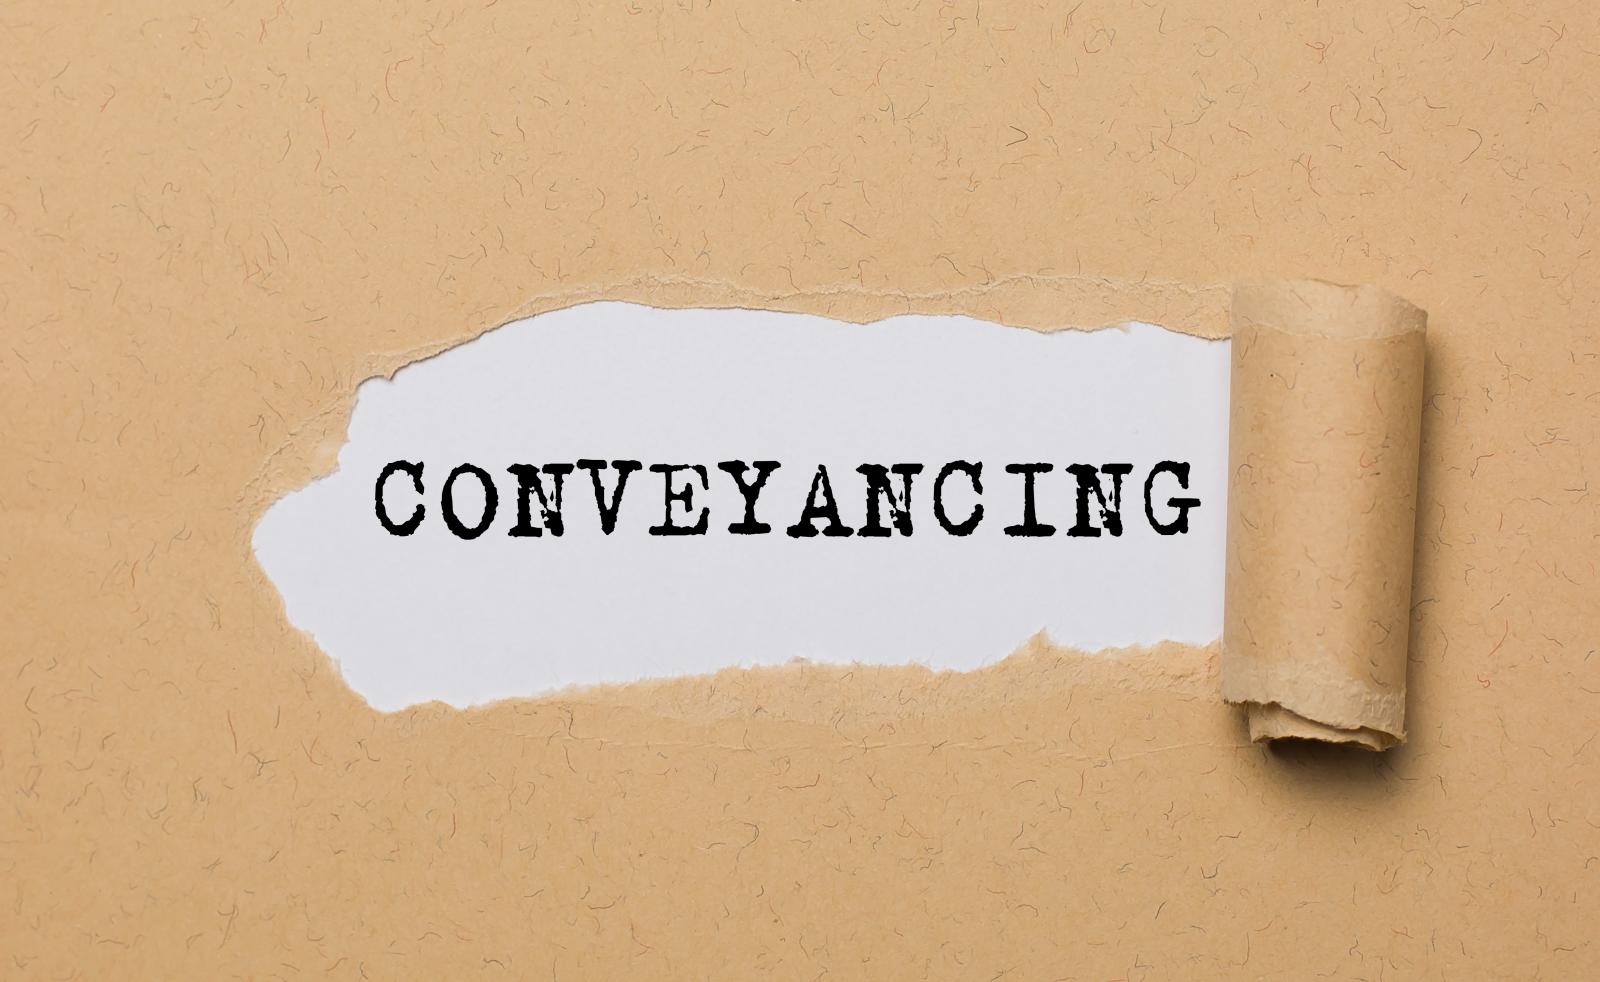 370,000 sellers face summer in ‘conveyancing limbo’ – warning